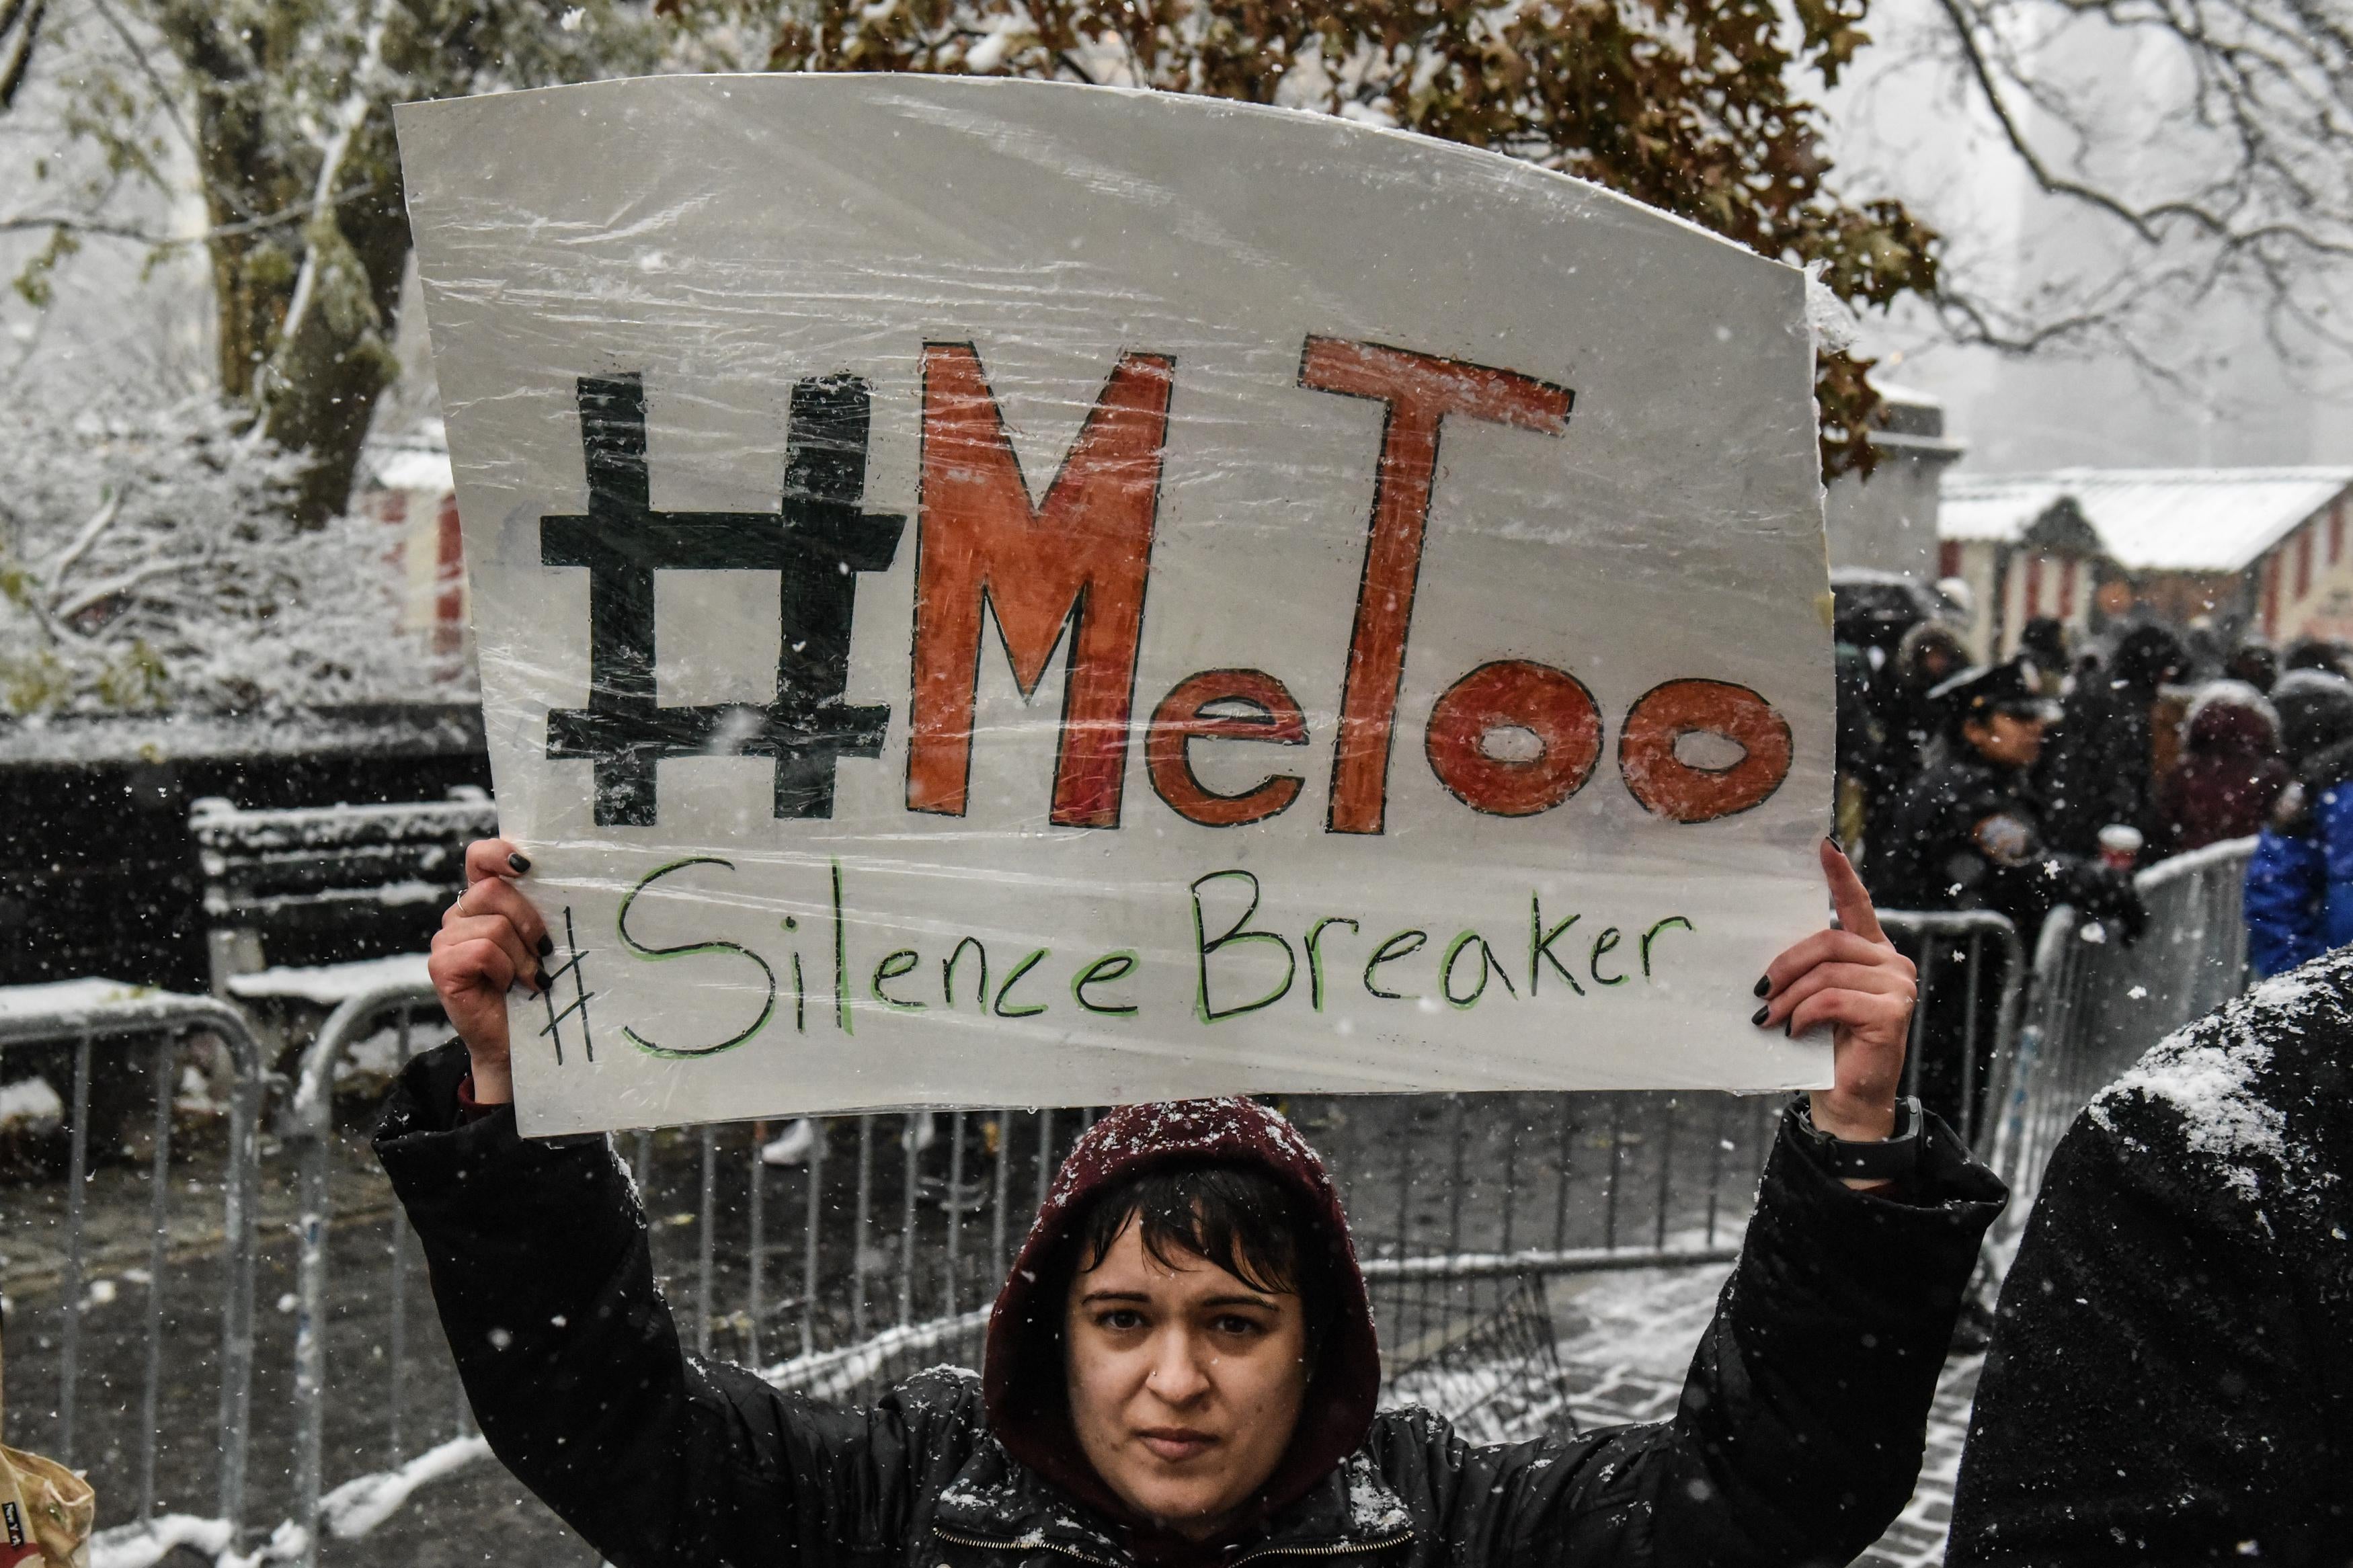 A woman holds a sign that says, "#MeToo #SilenceBreaker."